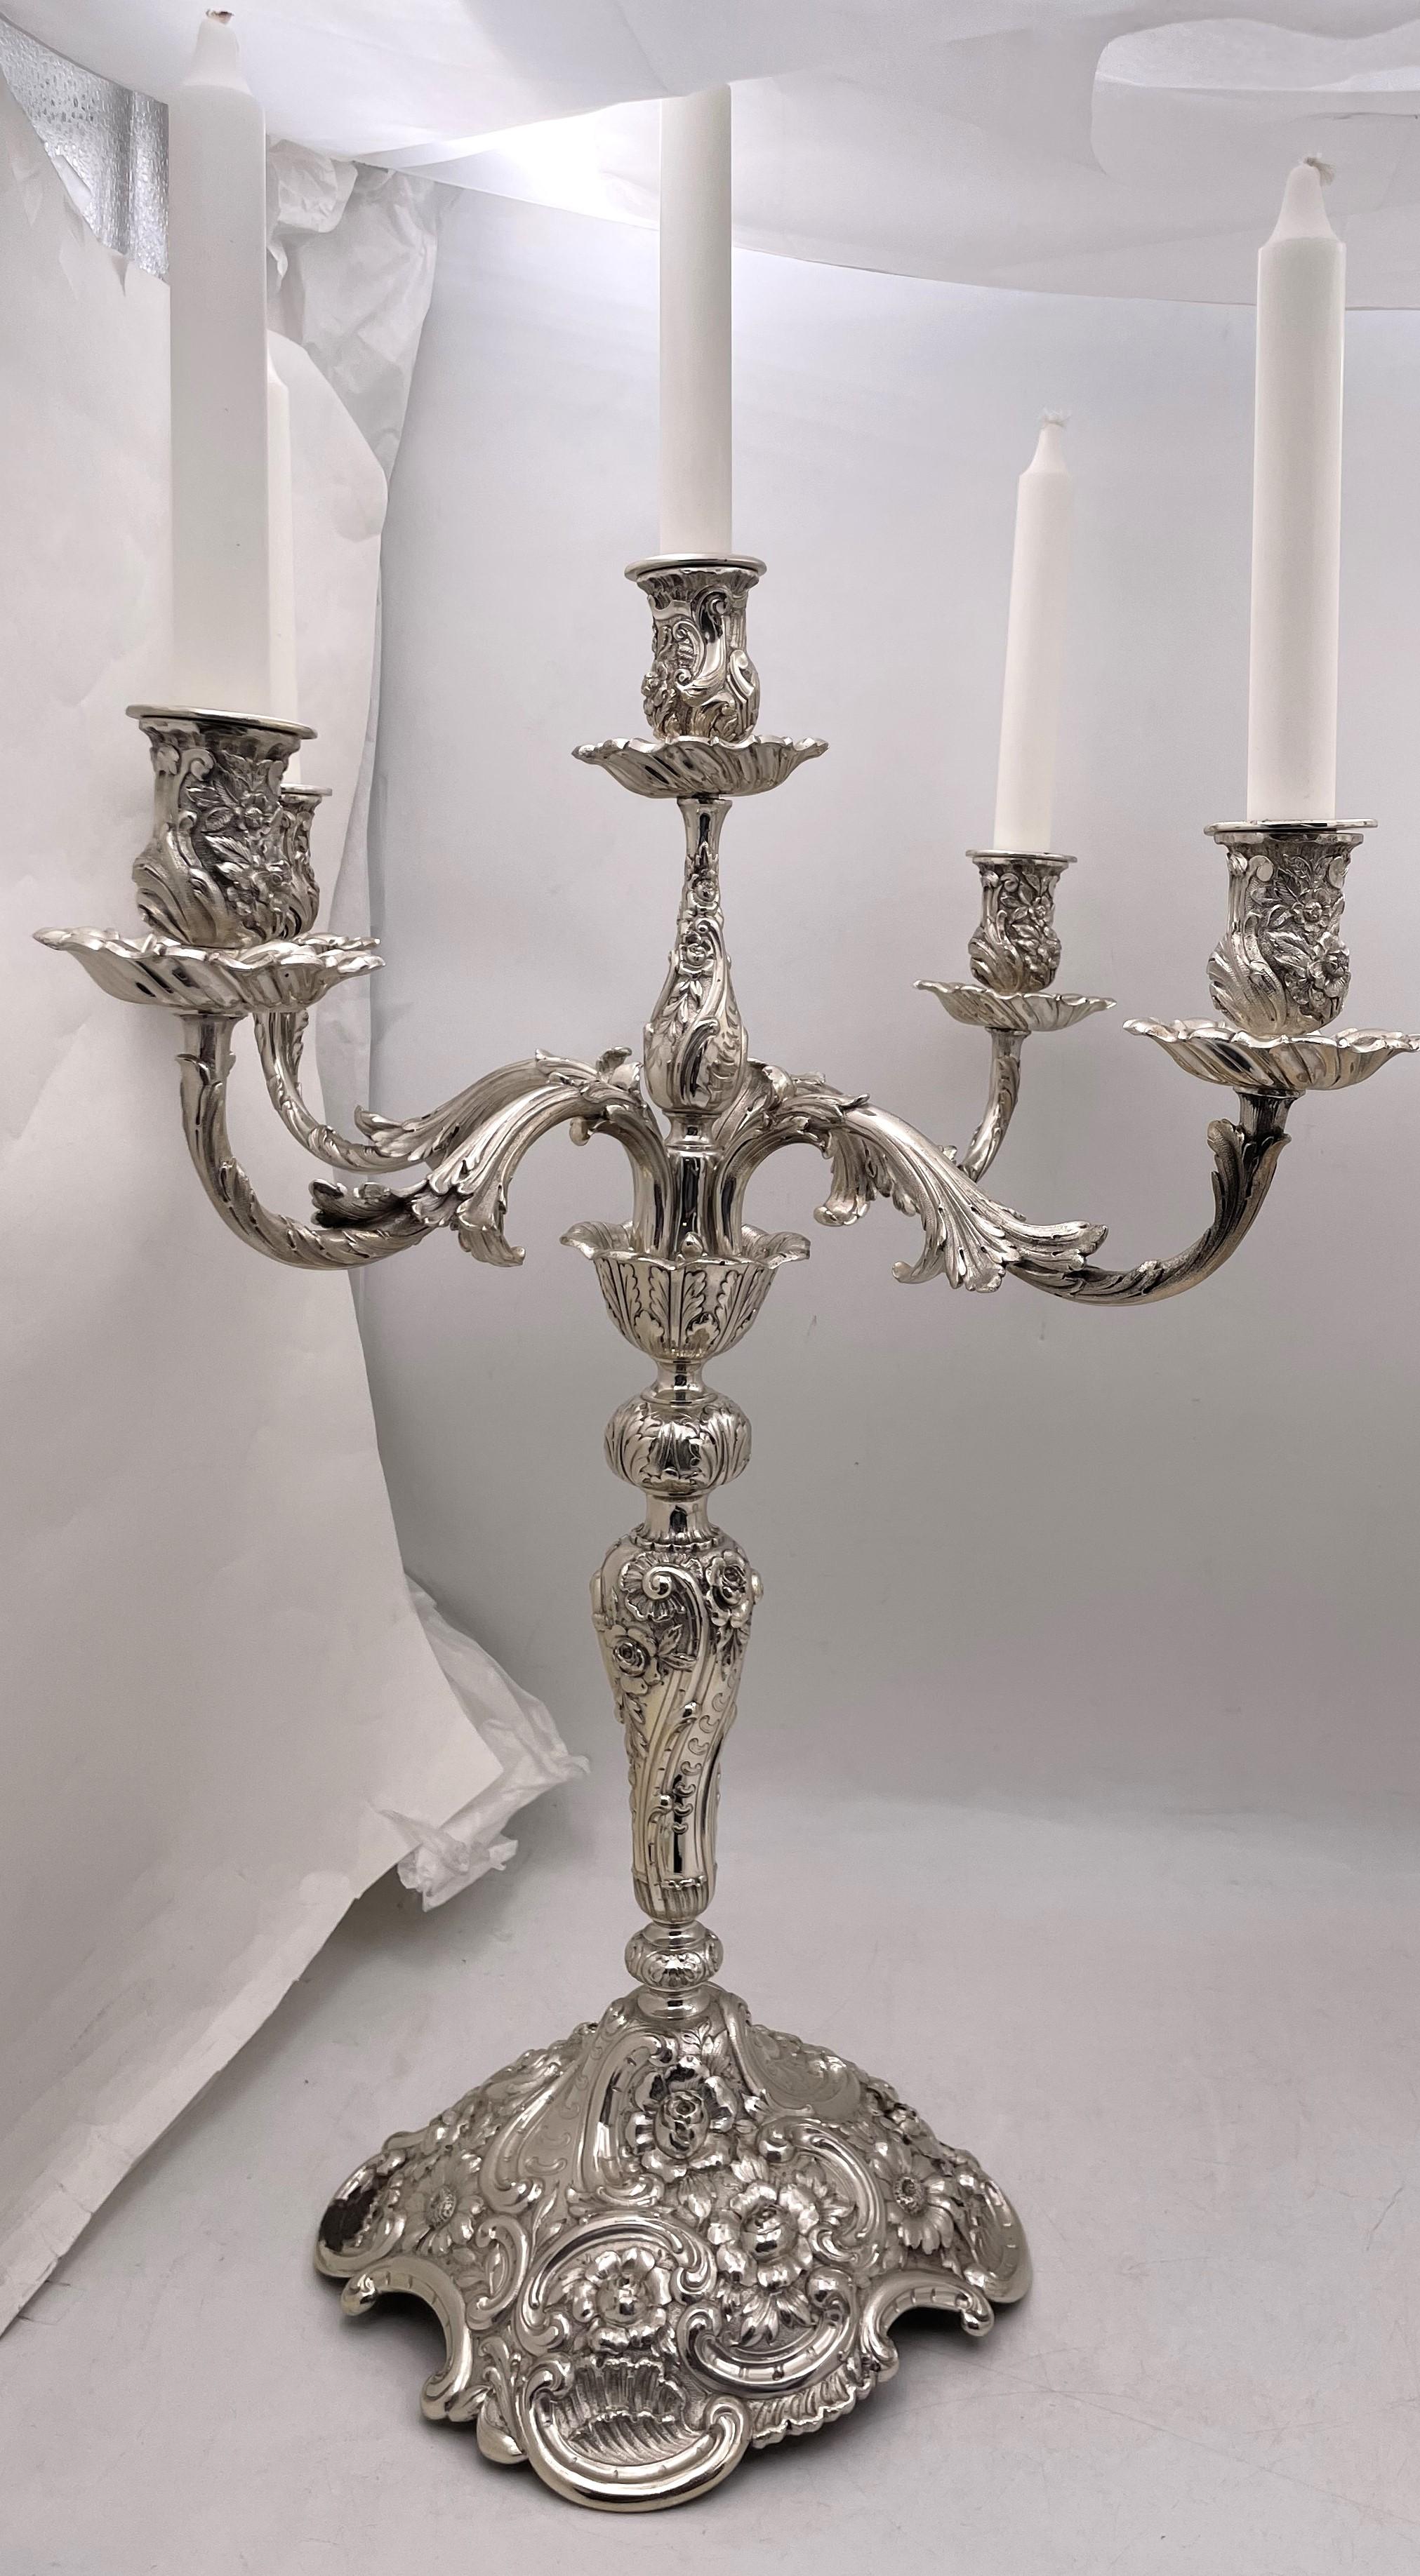 Pair of Tiffany & Co. sterling silver 5-light monumental candelabra in the tasteful, hand-chased repousse motif, finely executed with a spread of 5 arms. From circa 1907 and in crisp condition, they measure 24'' in height by 19'' from arm to arm.